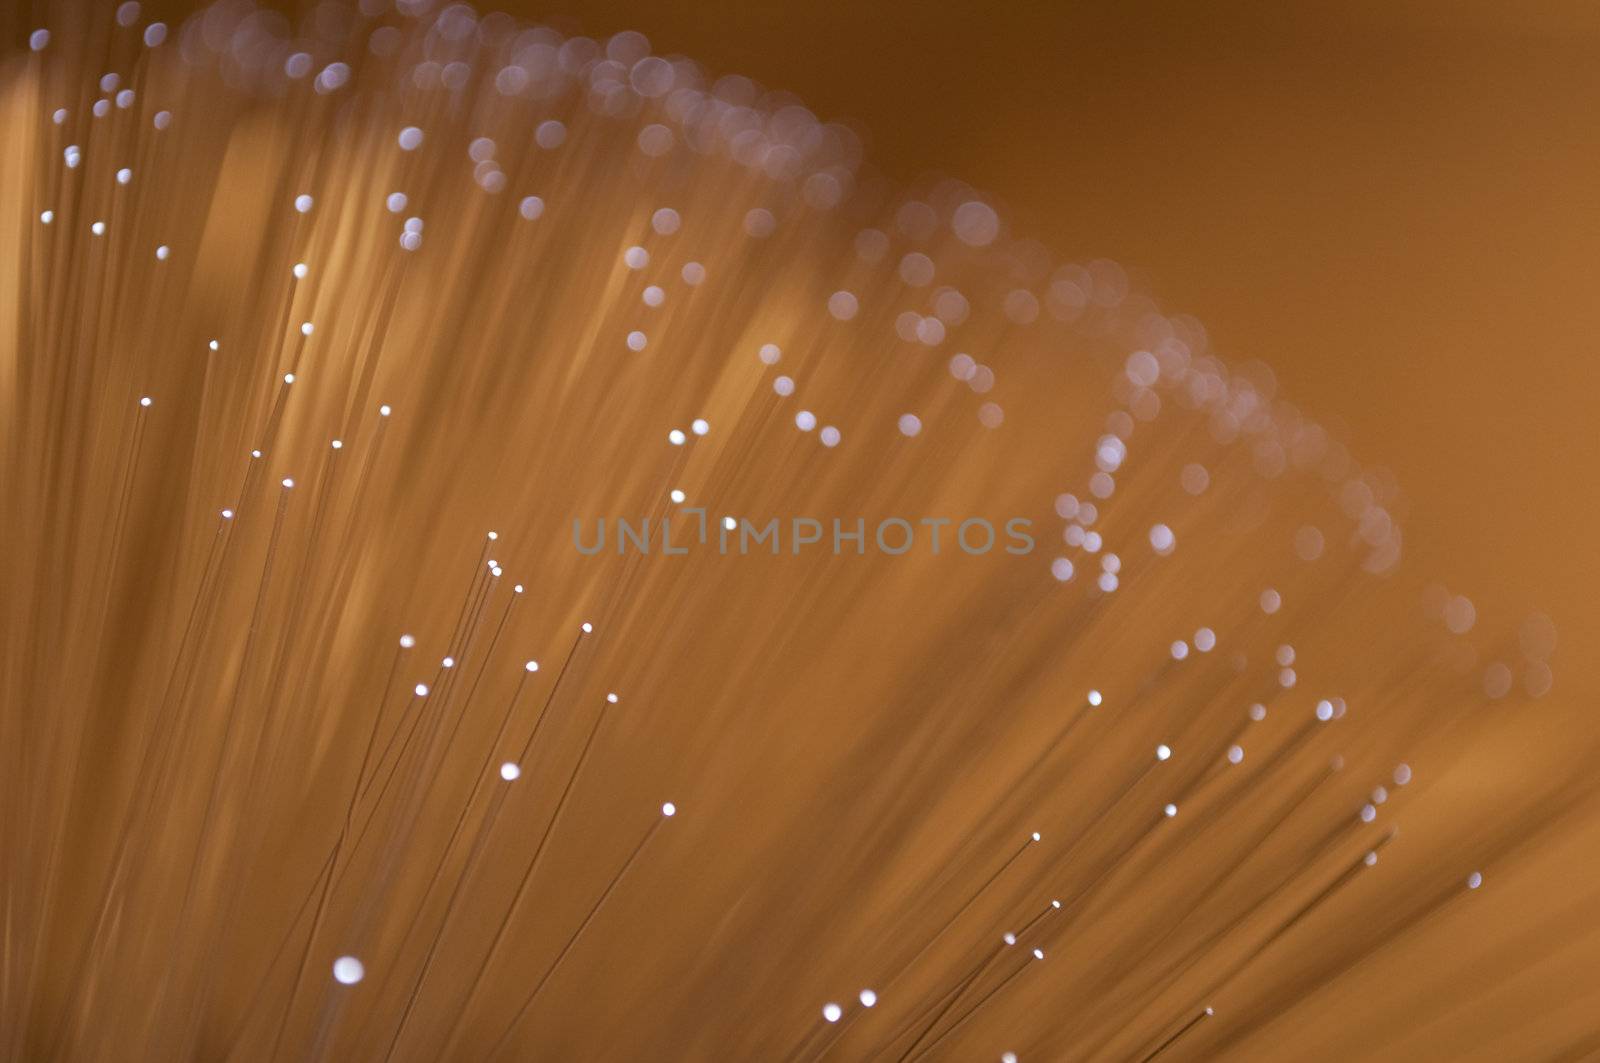 Close and low level angle capturing the ends of many illuminated fibre optic light strands.